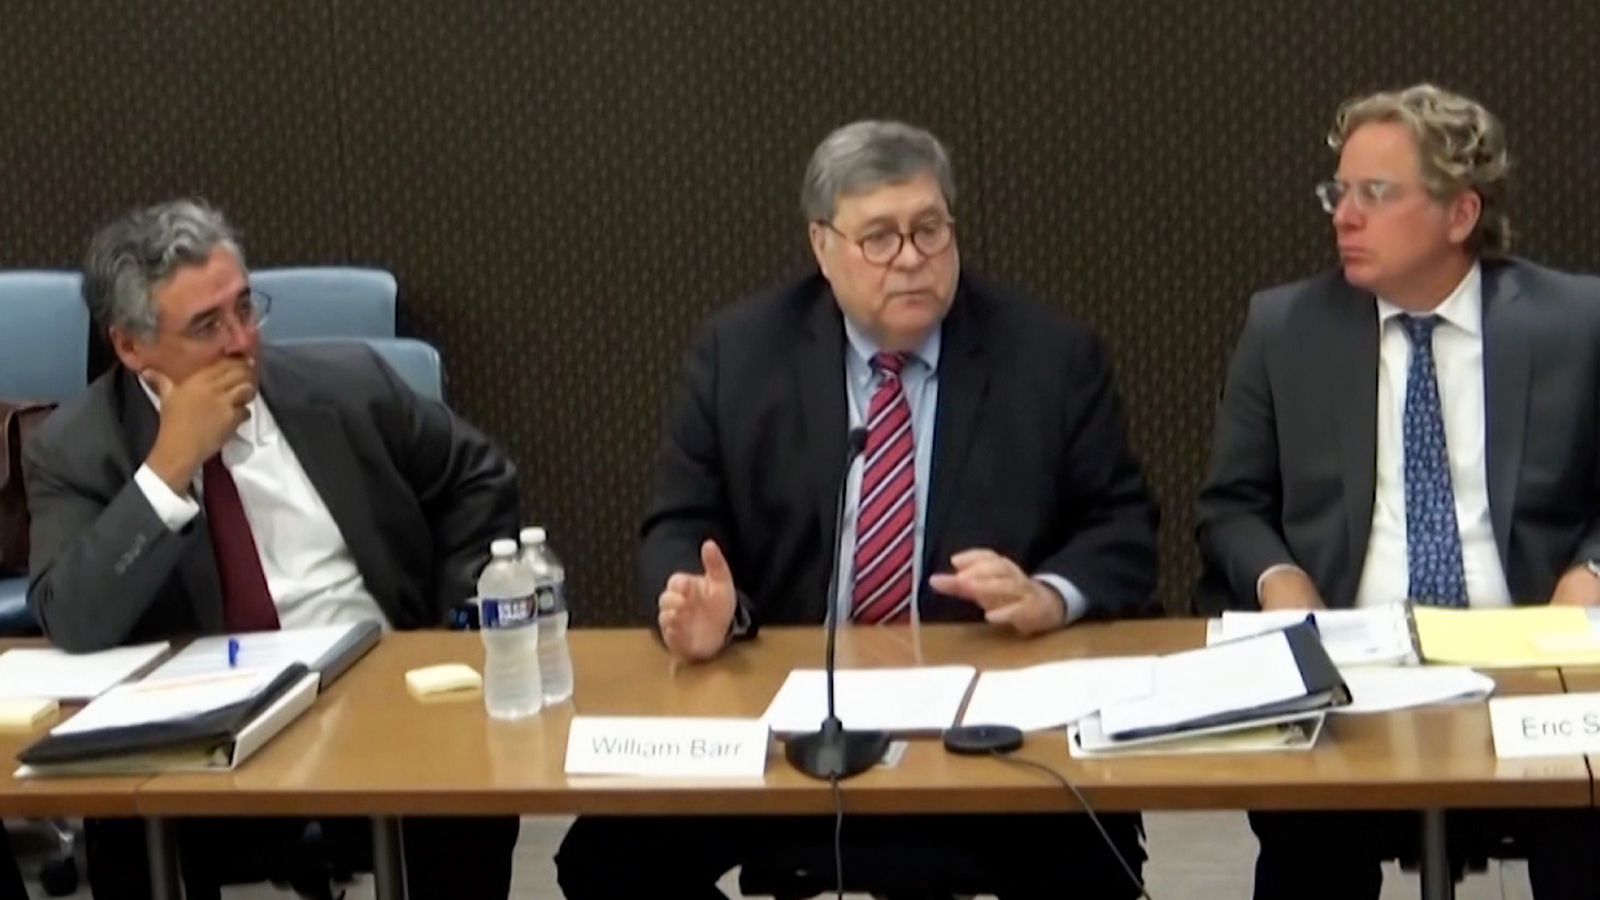 The recorded testimony of former Attorney General Bill Barr, center, was shown again on Tuesday.